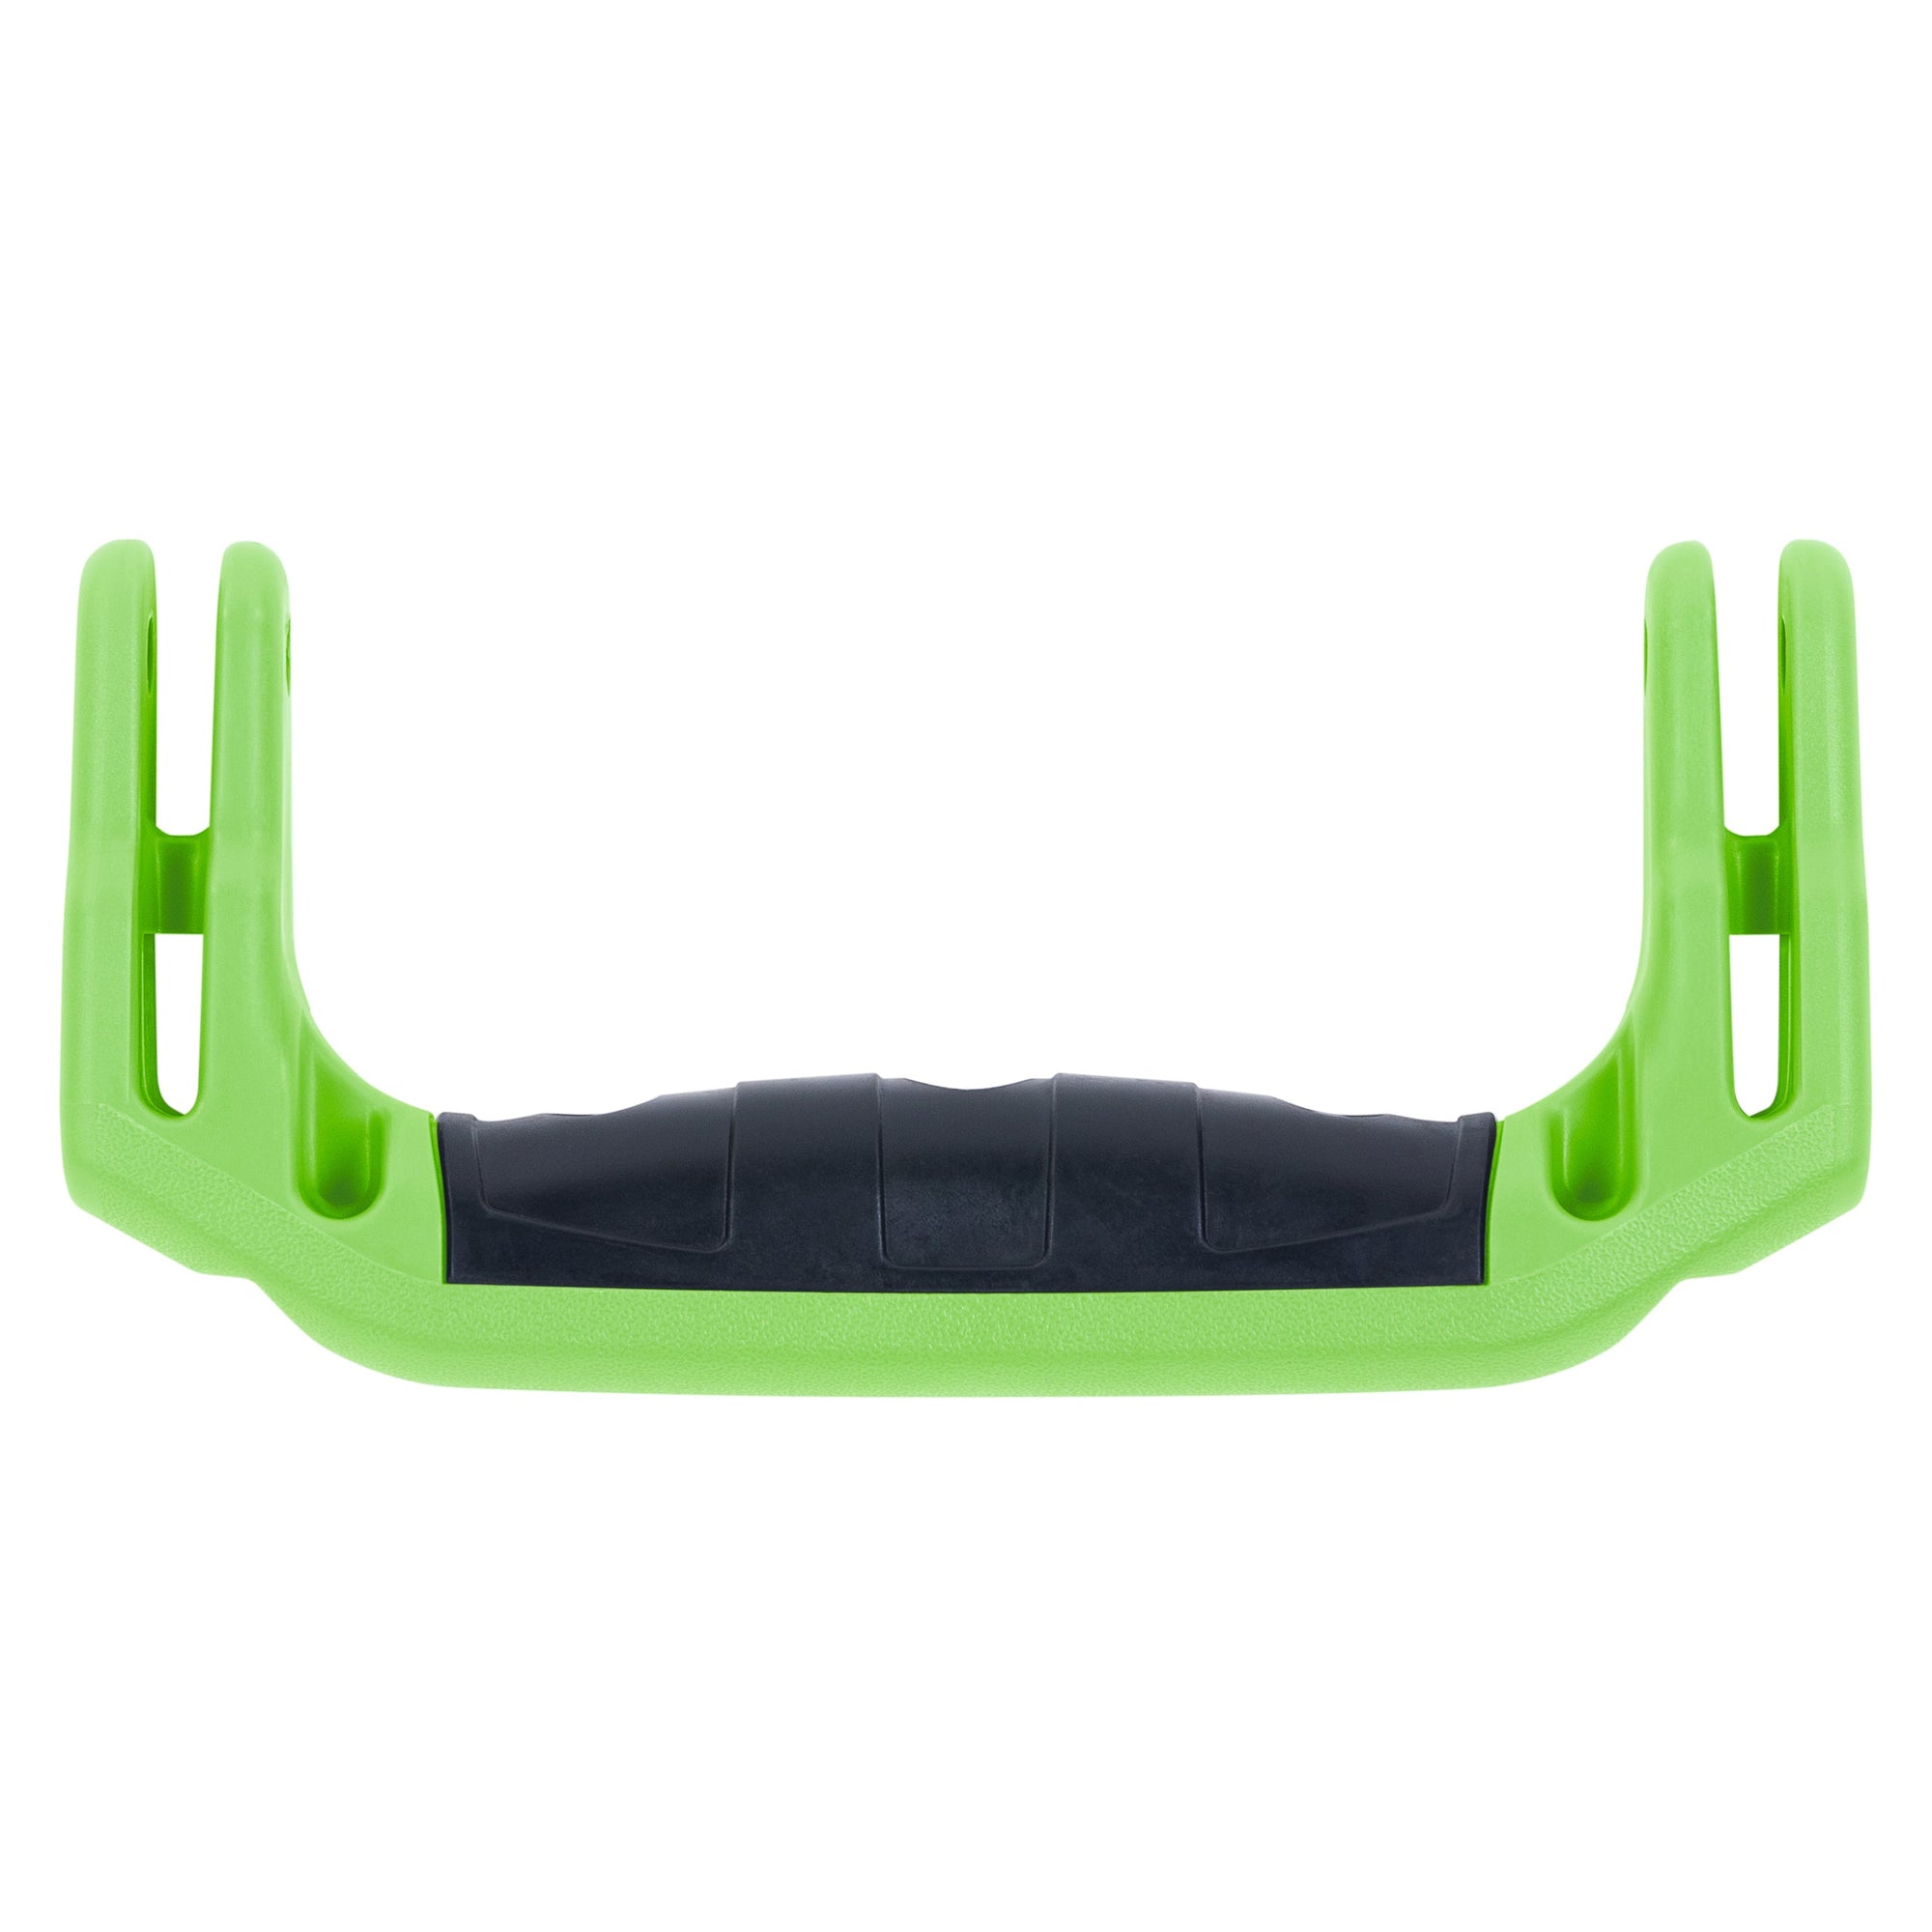 Pelican Rubber Overmolded Replacement Handle, Small, Lime Green (2-Prong) ColorCase 